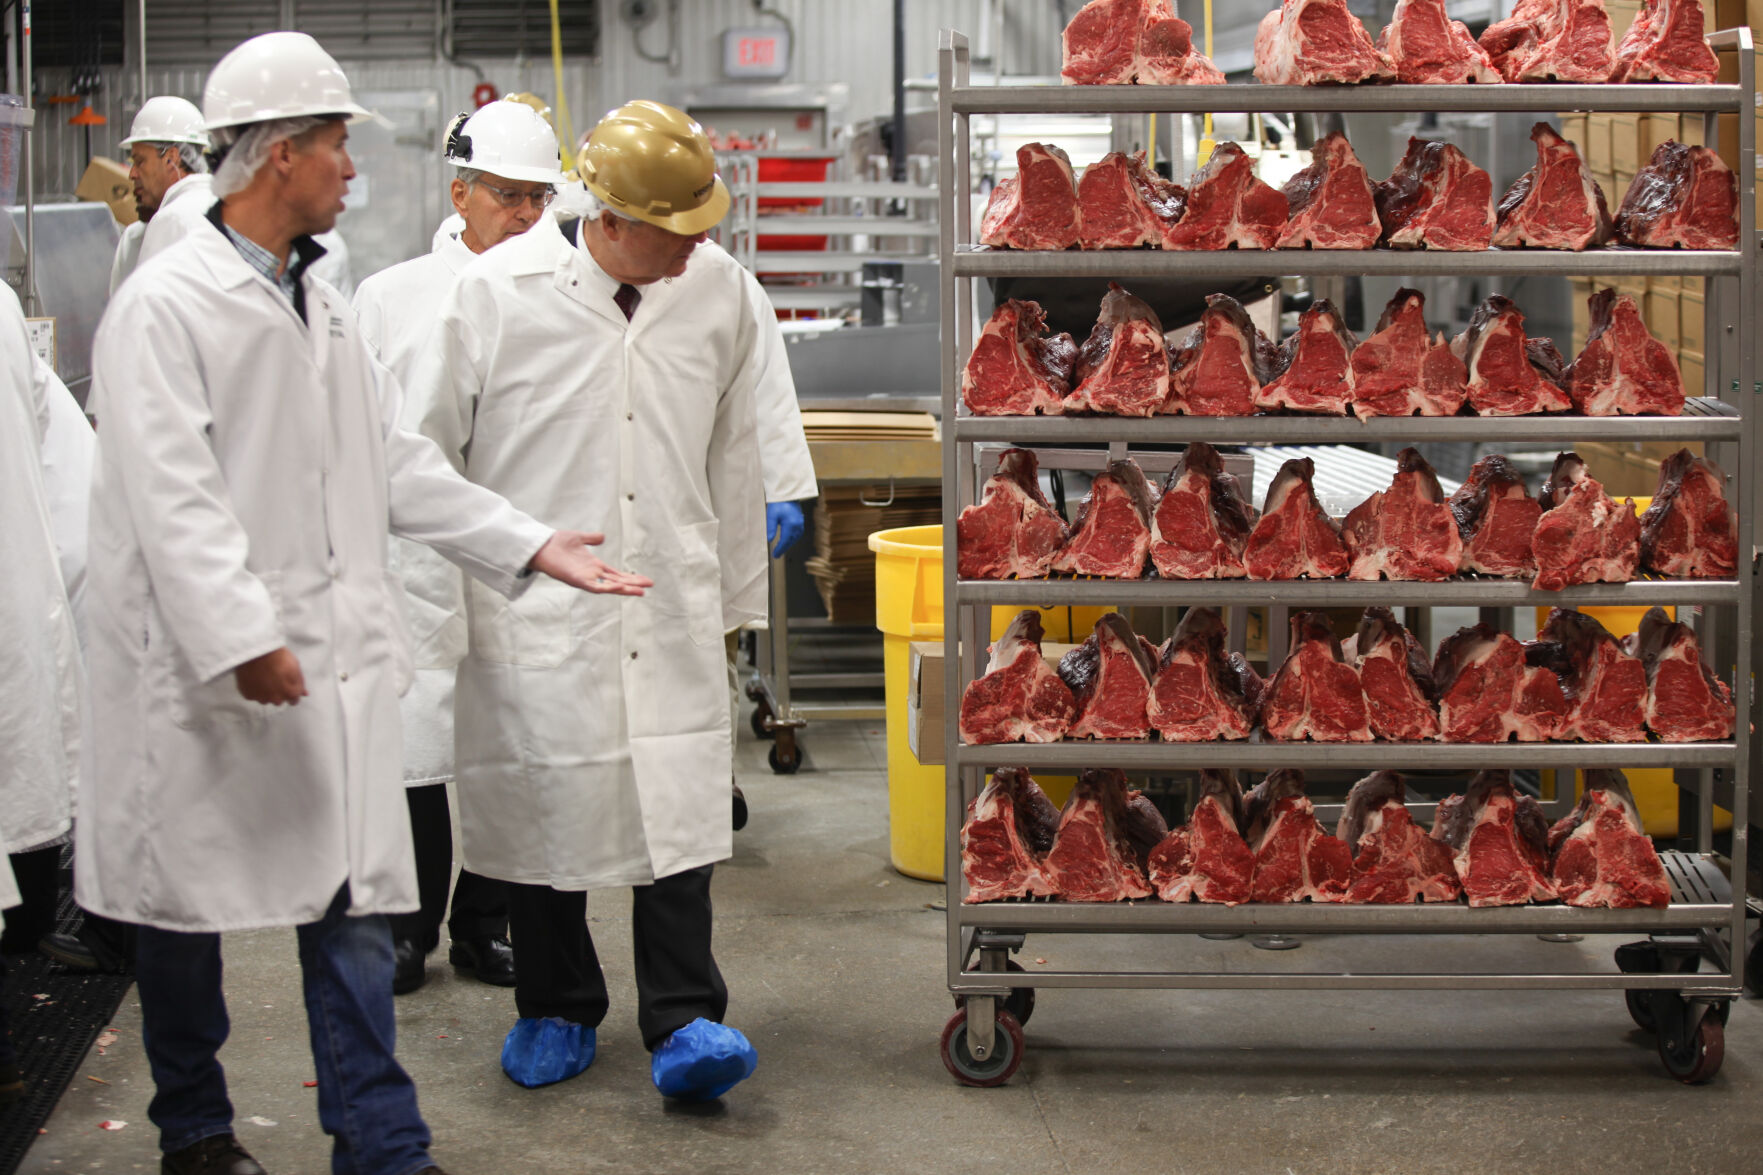 <p>FILE - U.S. Agriculture Secretary Tom Vilsack, center, tours the Greater Omaha Packing beef processing plant in Omaha, Neb., on Nov. 2, 2022. Vilsack sent a letter Wednesday, April 12, 2023, to the 18 largest meat and poultry producers urging them to examine the hiring practices at their companies and suppliers. The letter is part of a broader effort by the Biden administration to crack down on the use of child labor. (AP Photo/Josh Funk, File)</p>   PHOTO CREDIT: Josh Funk 